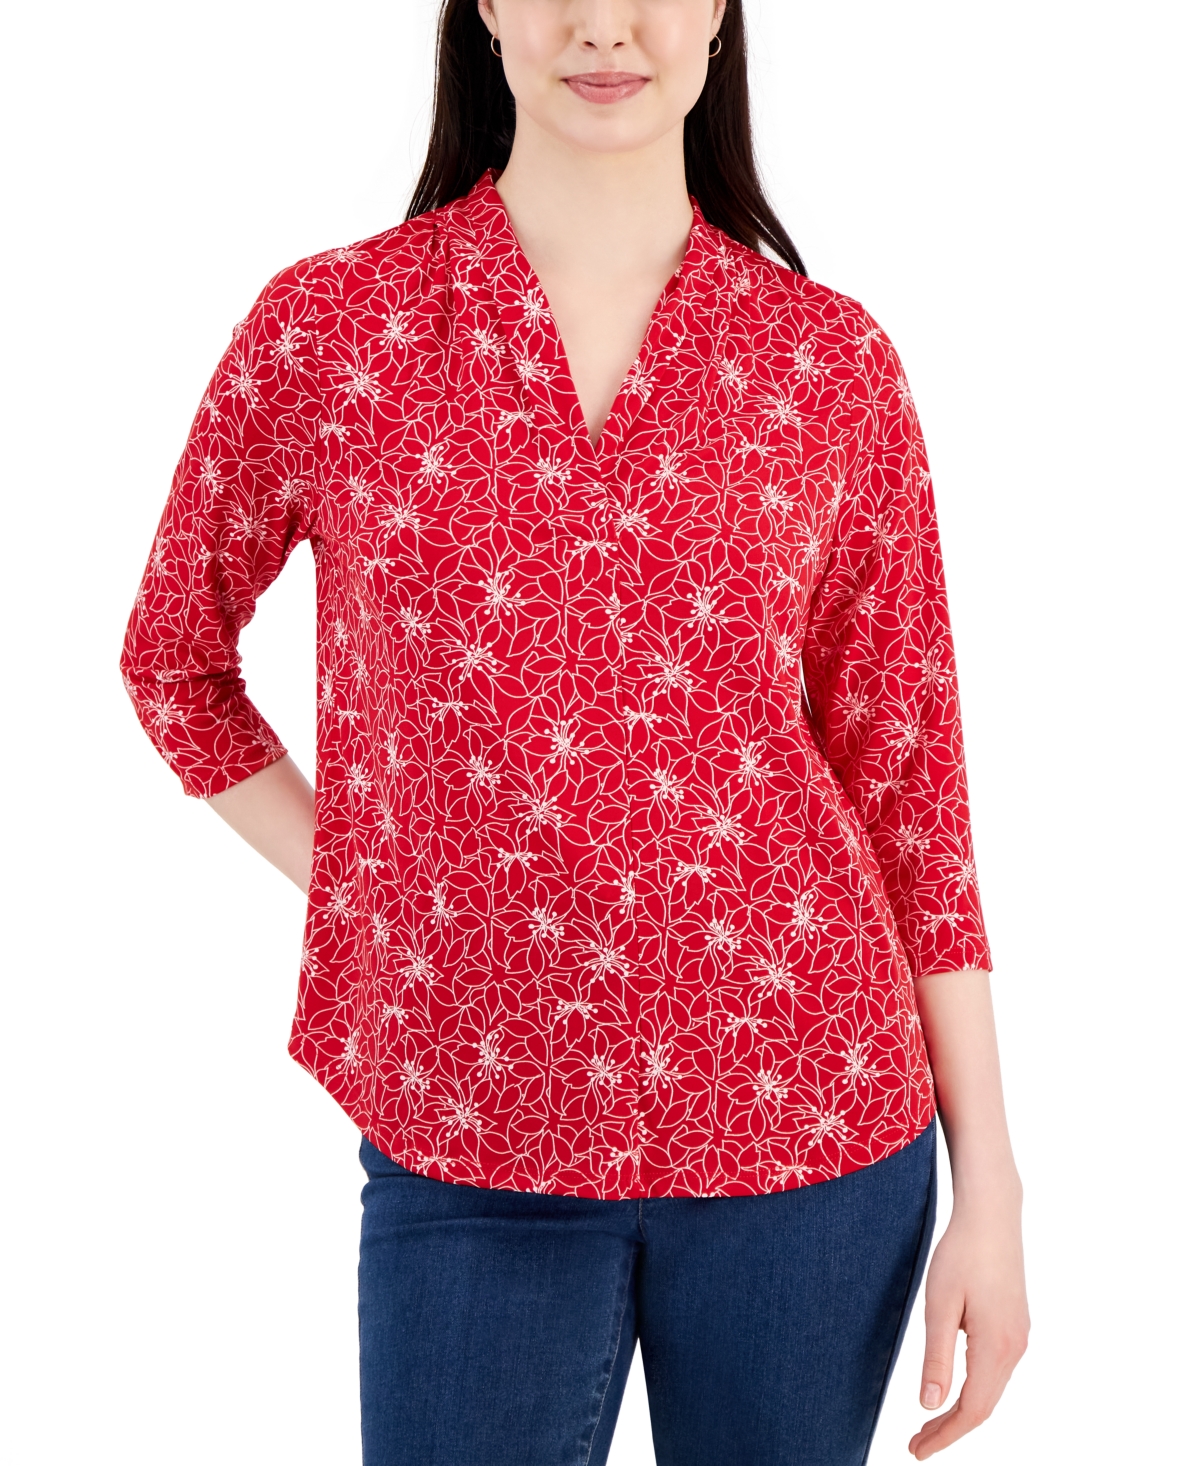 CHARTER CLUB WOMEN'S PRINTED PLEATED V-NECK KNIT TOP, CREATED FOR MACY'S